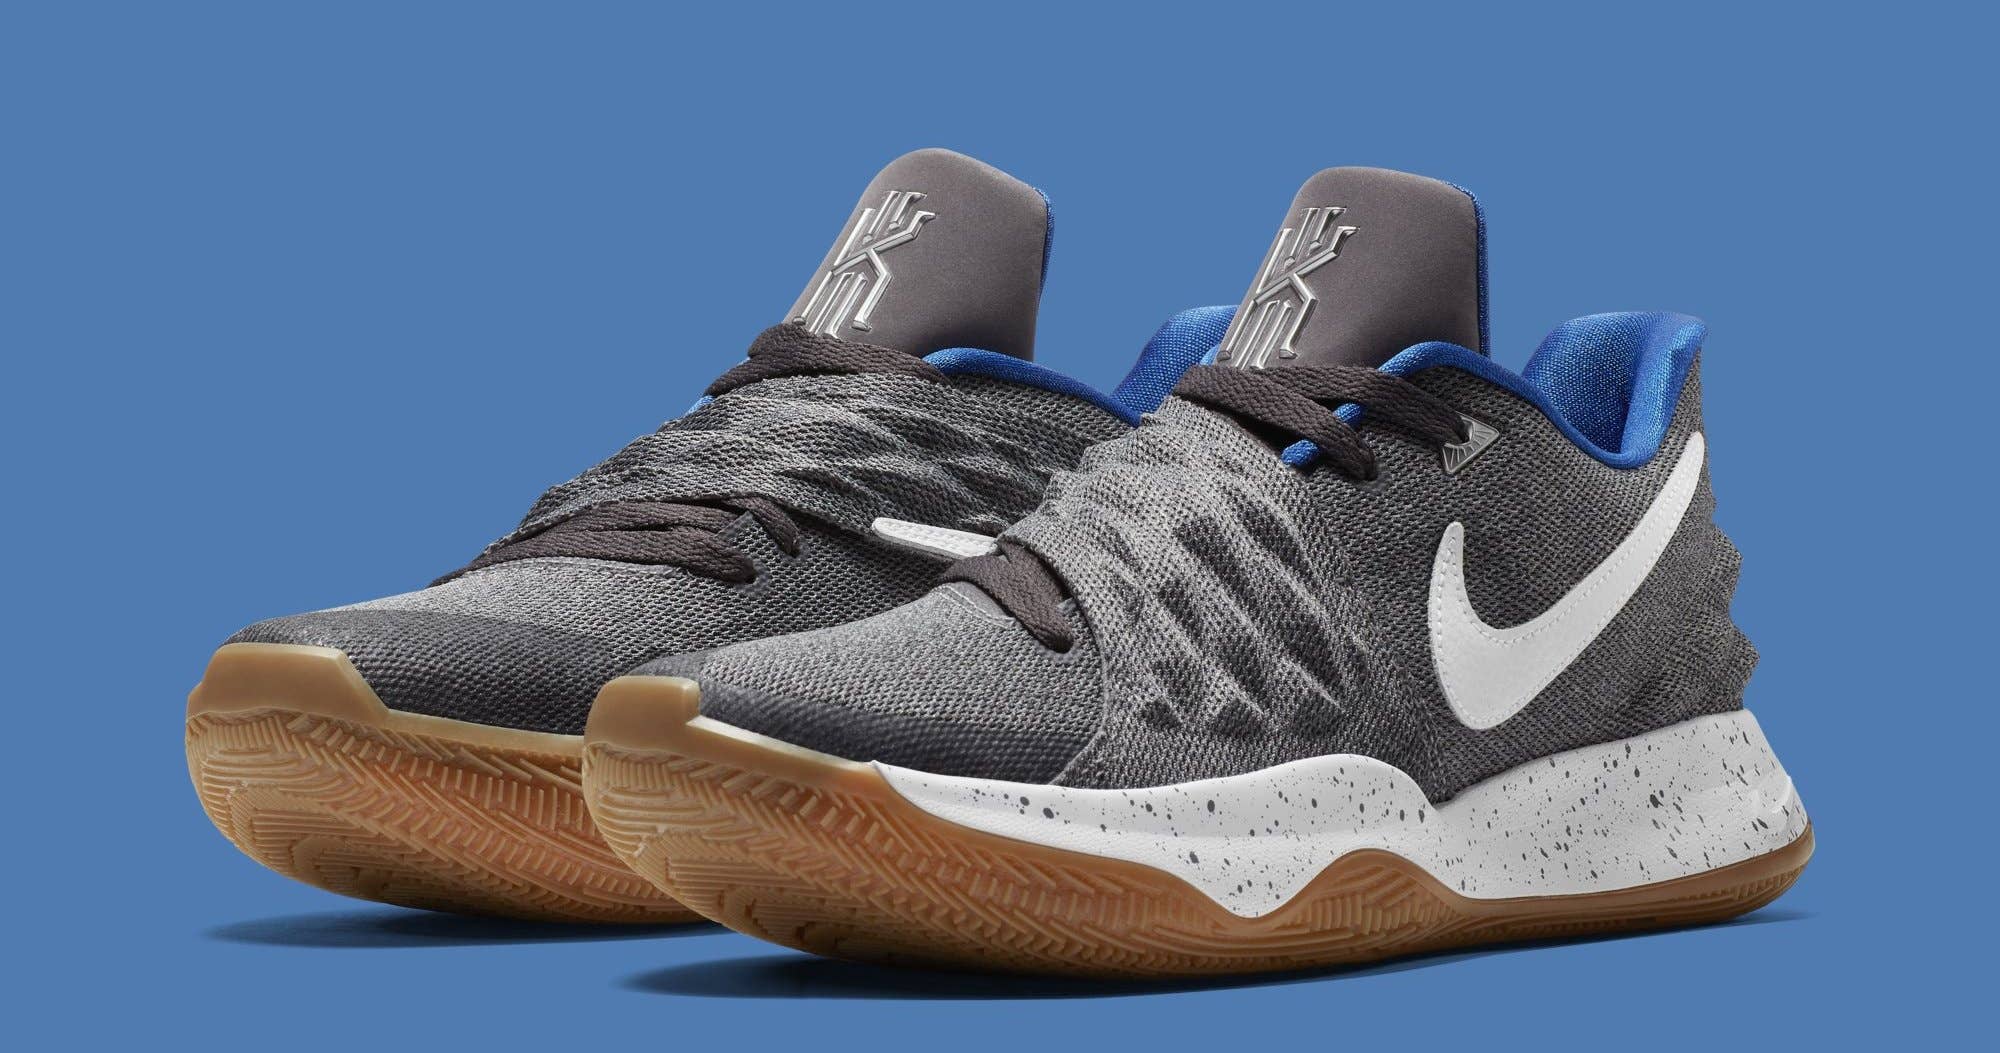 Nike Kyrie 4 Low 'Uncle Drew' AO8979 005 (Pair)